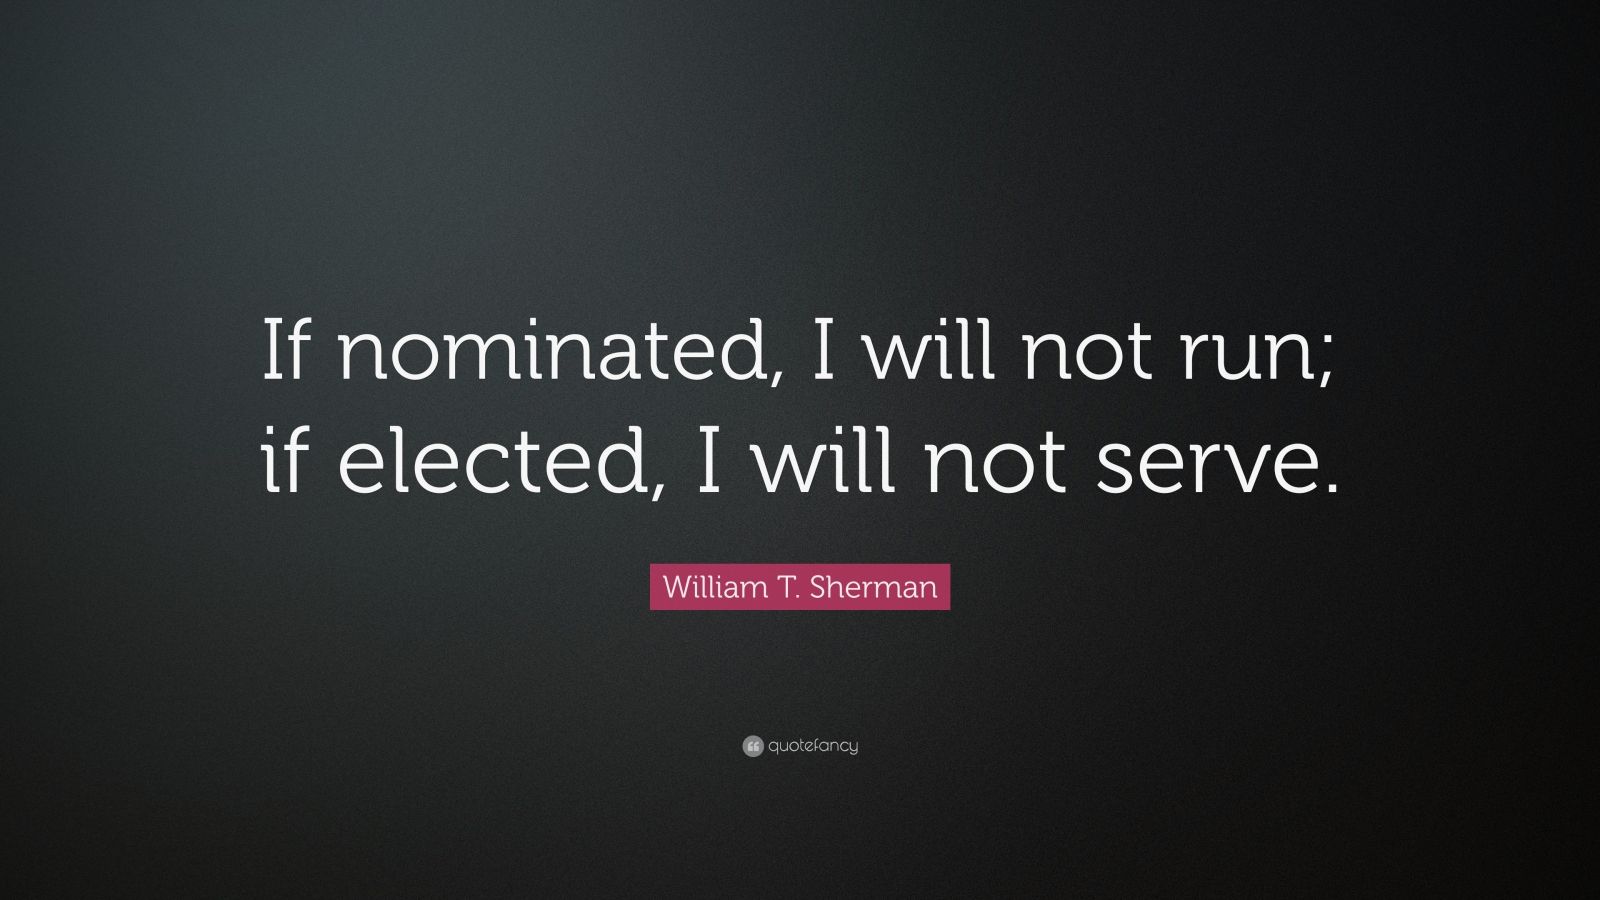 who said if nominated i will not run if elected i will not serve